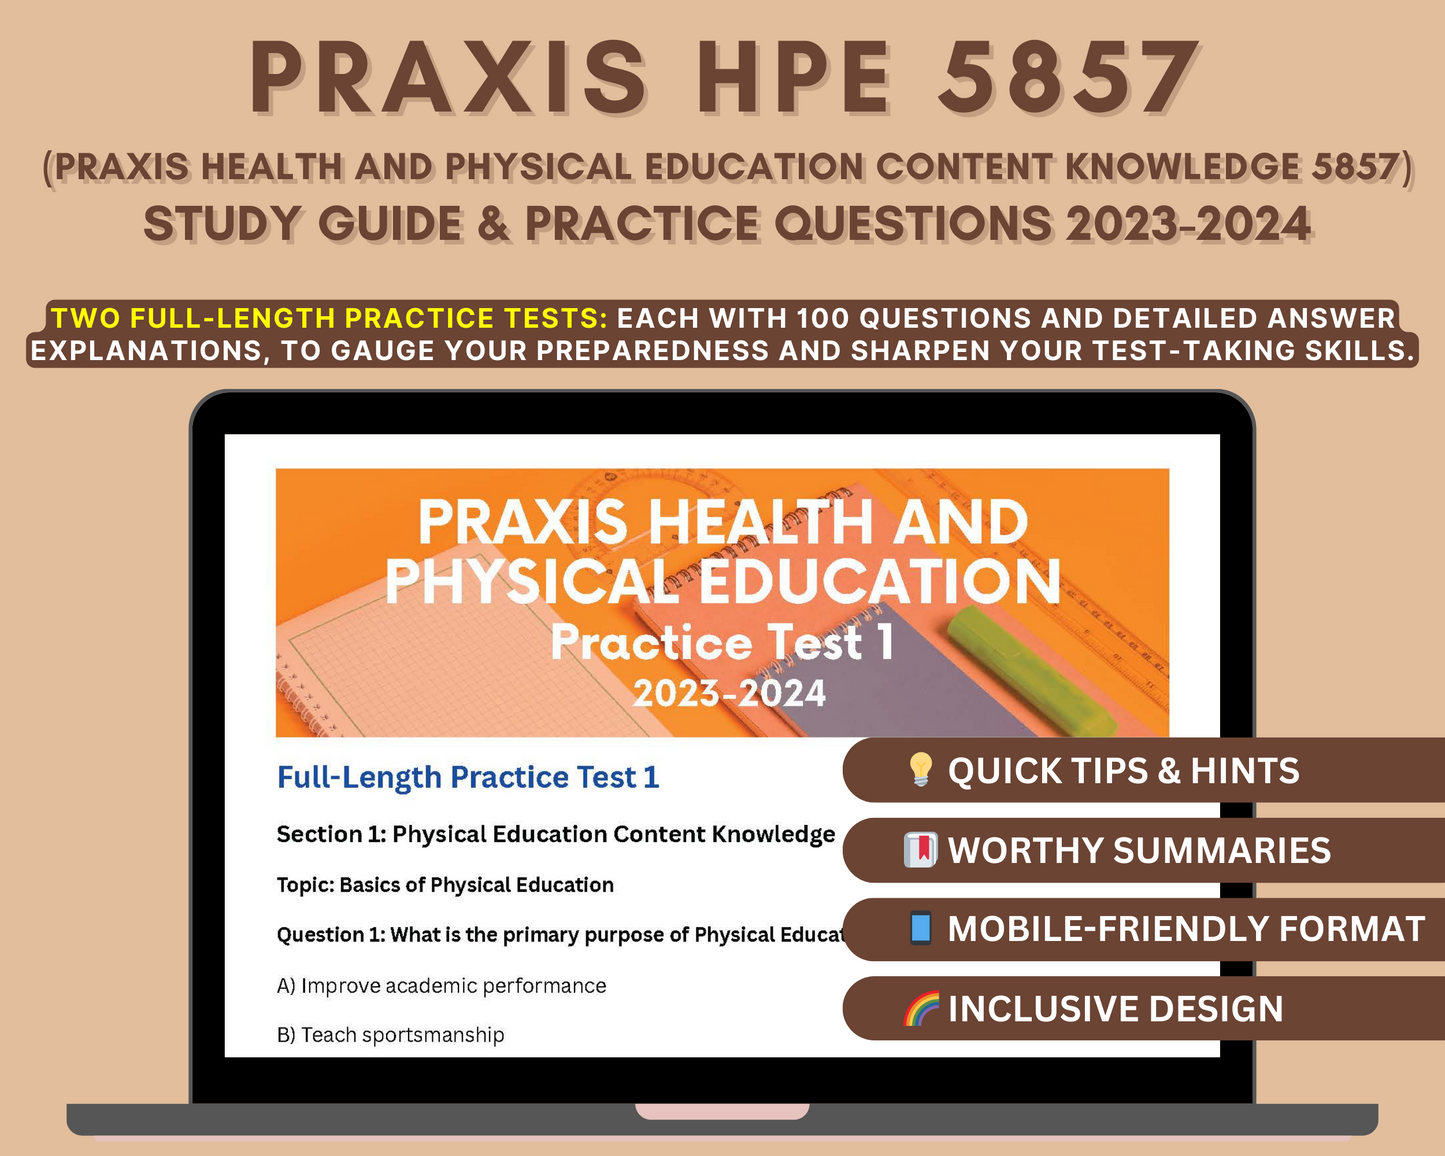 Praxis HPE Content Knowledge 5857 Study Guide 2023-2024: In-Depth Review & Practice Tests for Certified Teacher Exam